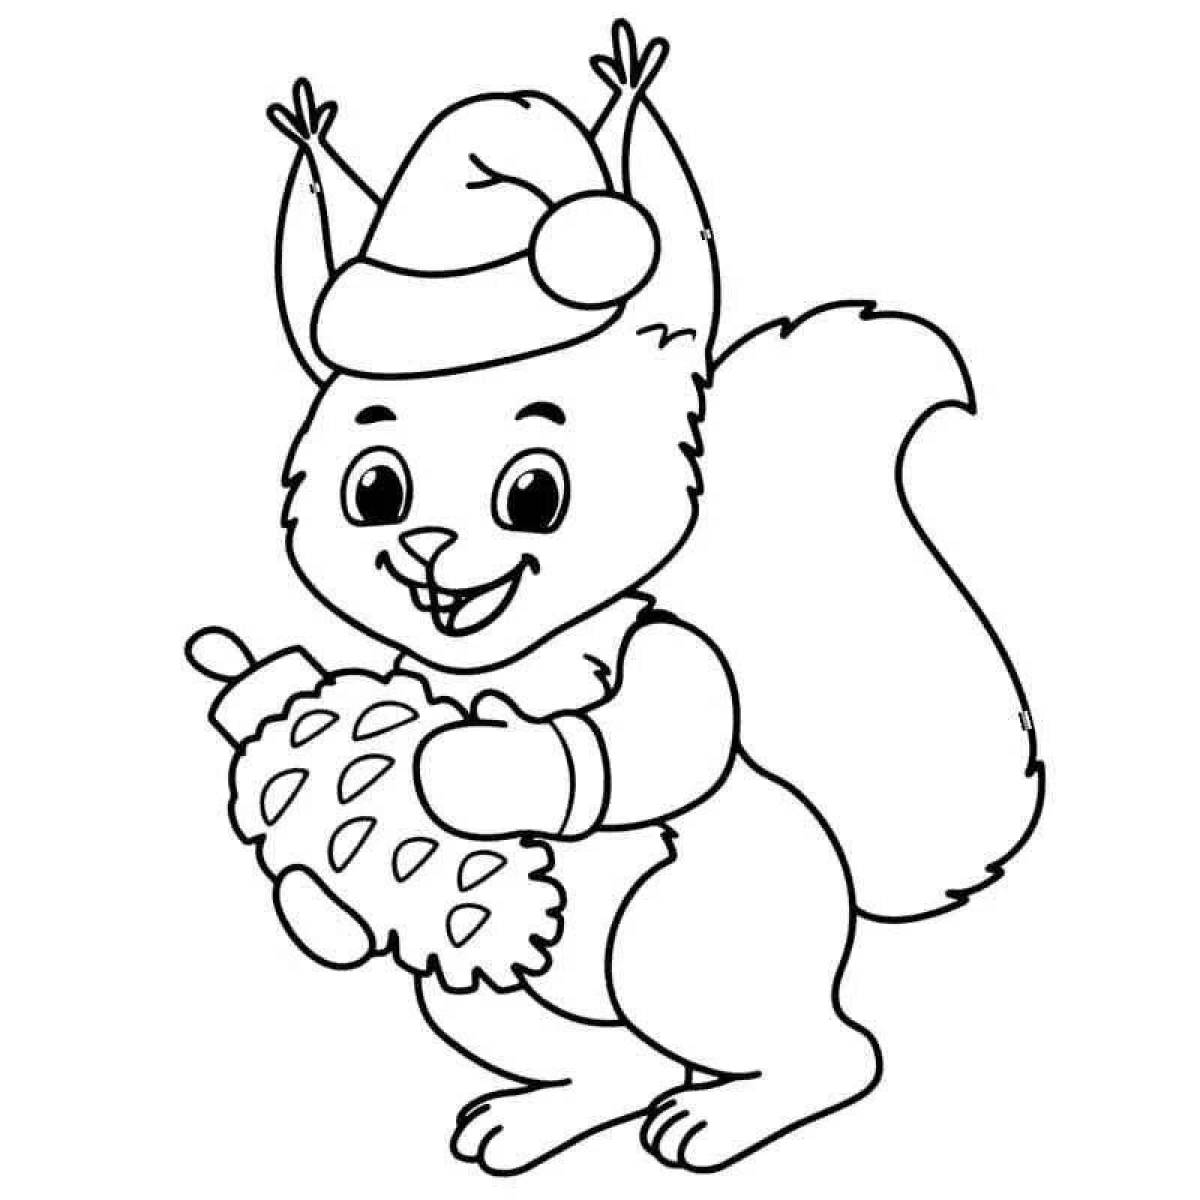 Squirrel live coloring for children 3-4 years old